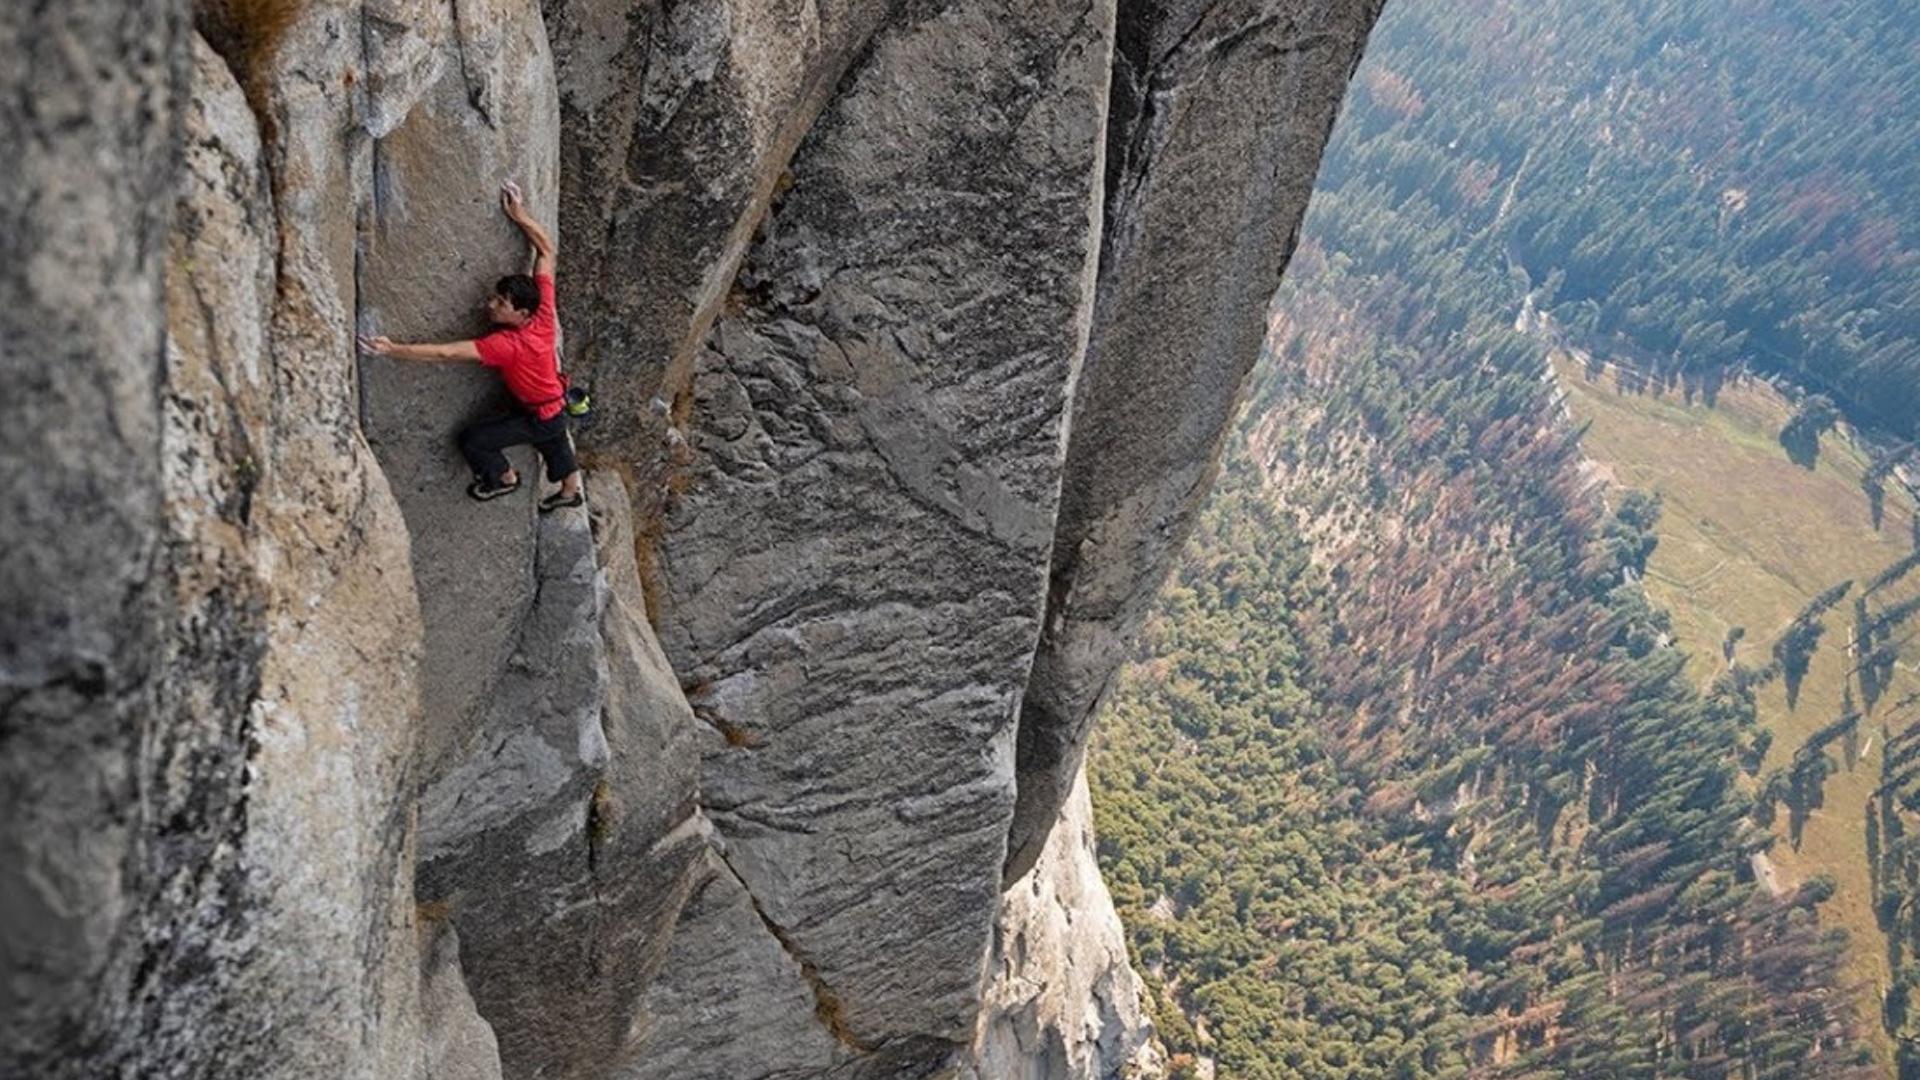 This Nerve Wracking 360 Video From FREE SOLO Shows Alex